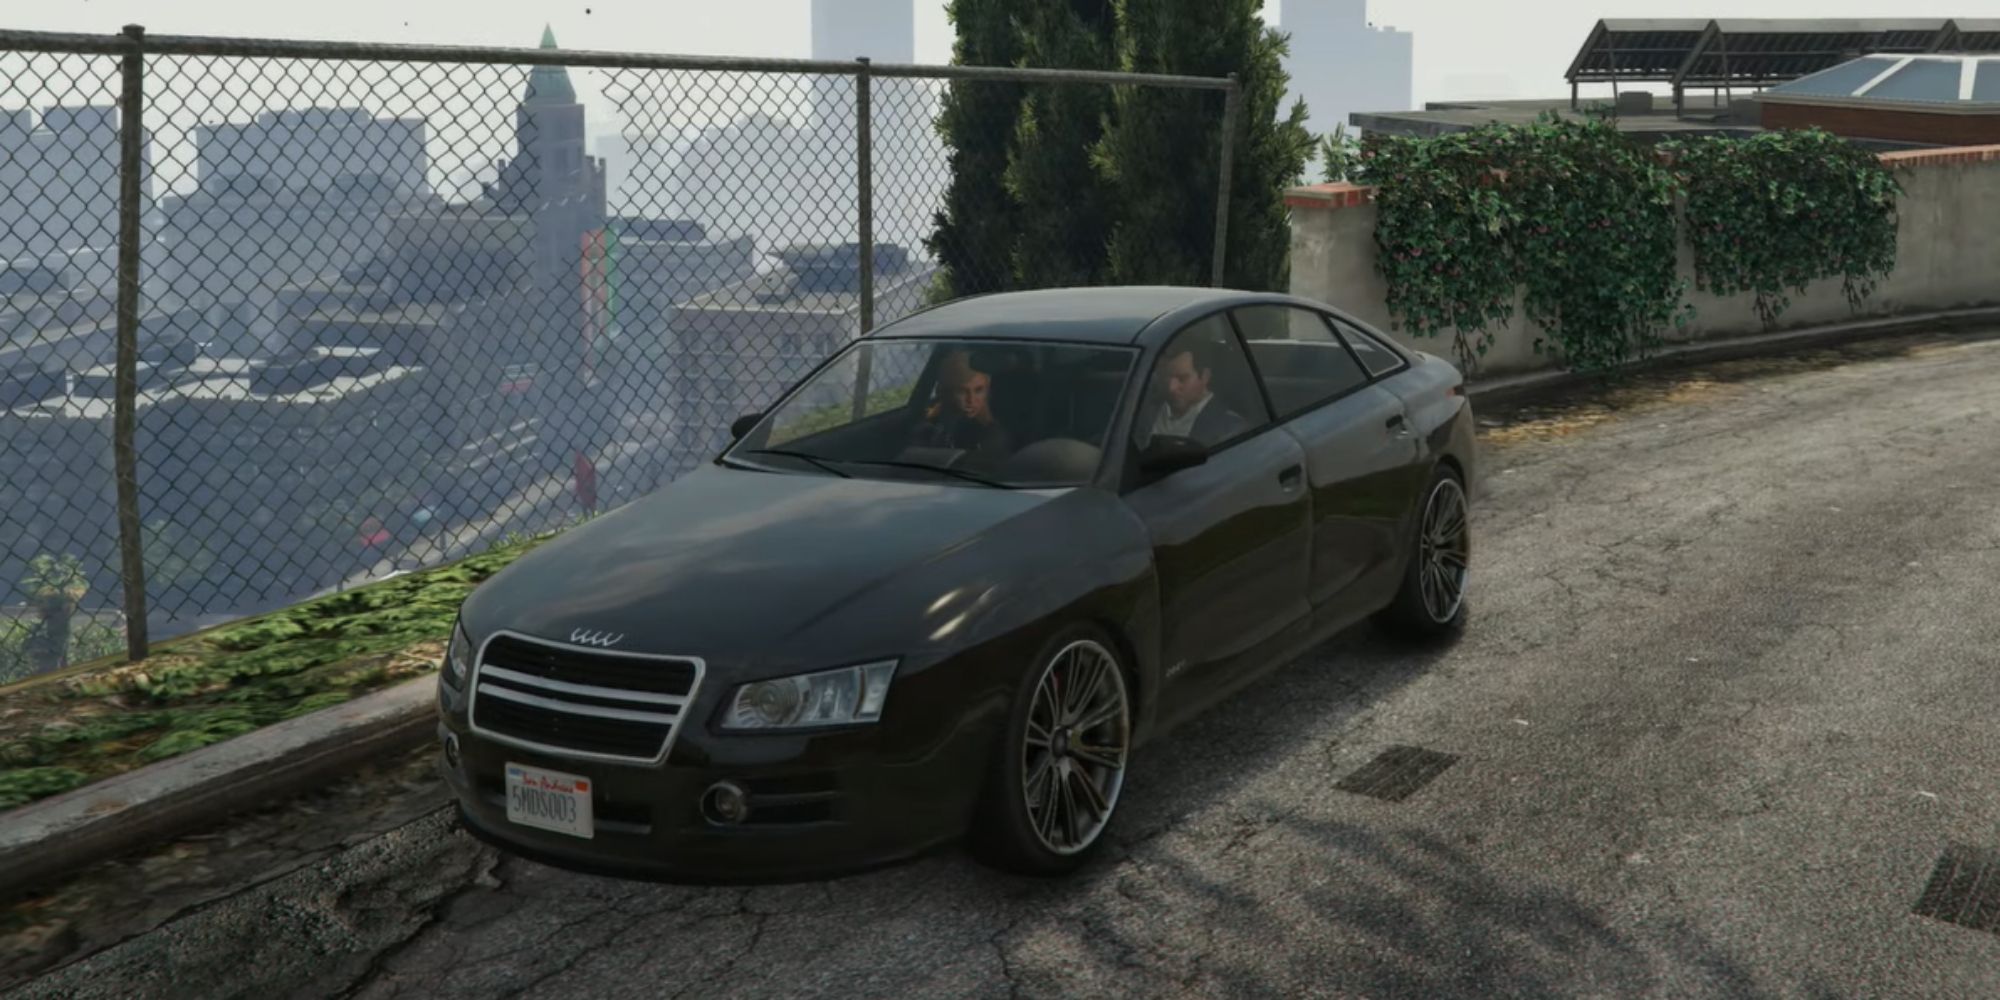 Grand Theft Auto 5 Screenshot Of Michael In Car With Lacey Jonas During Escape Paparazzi Random Event